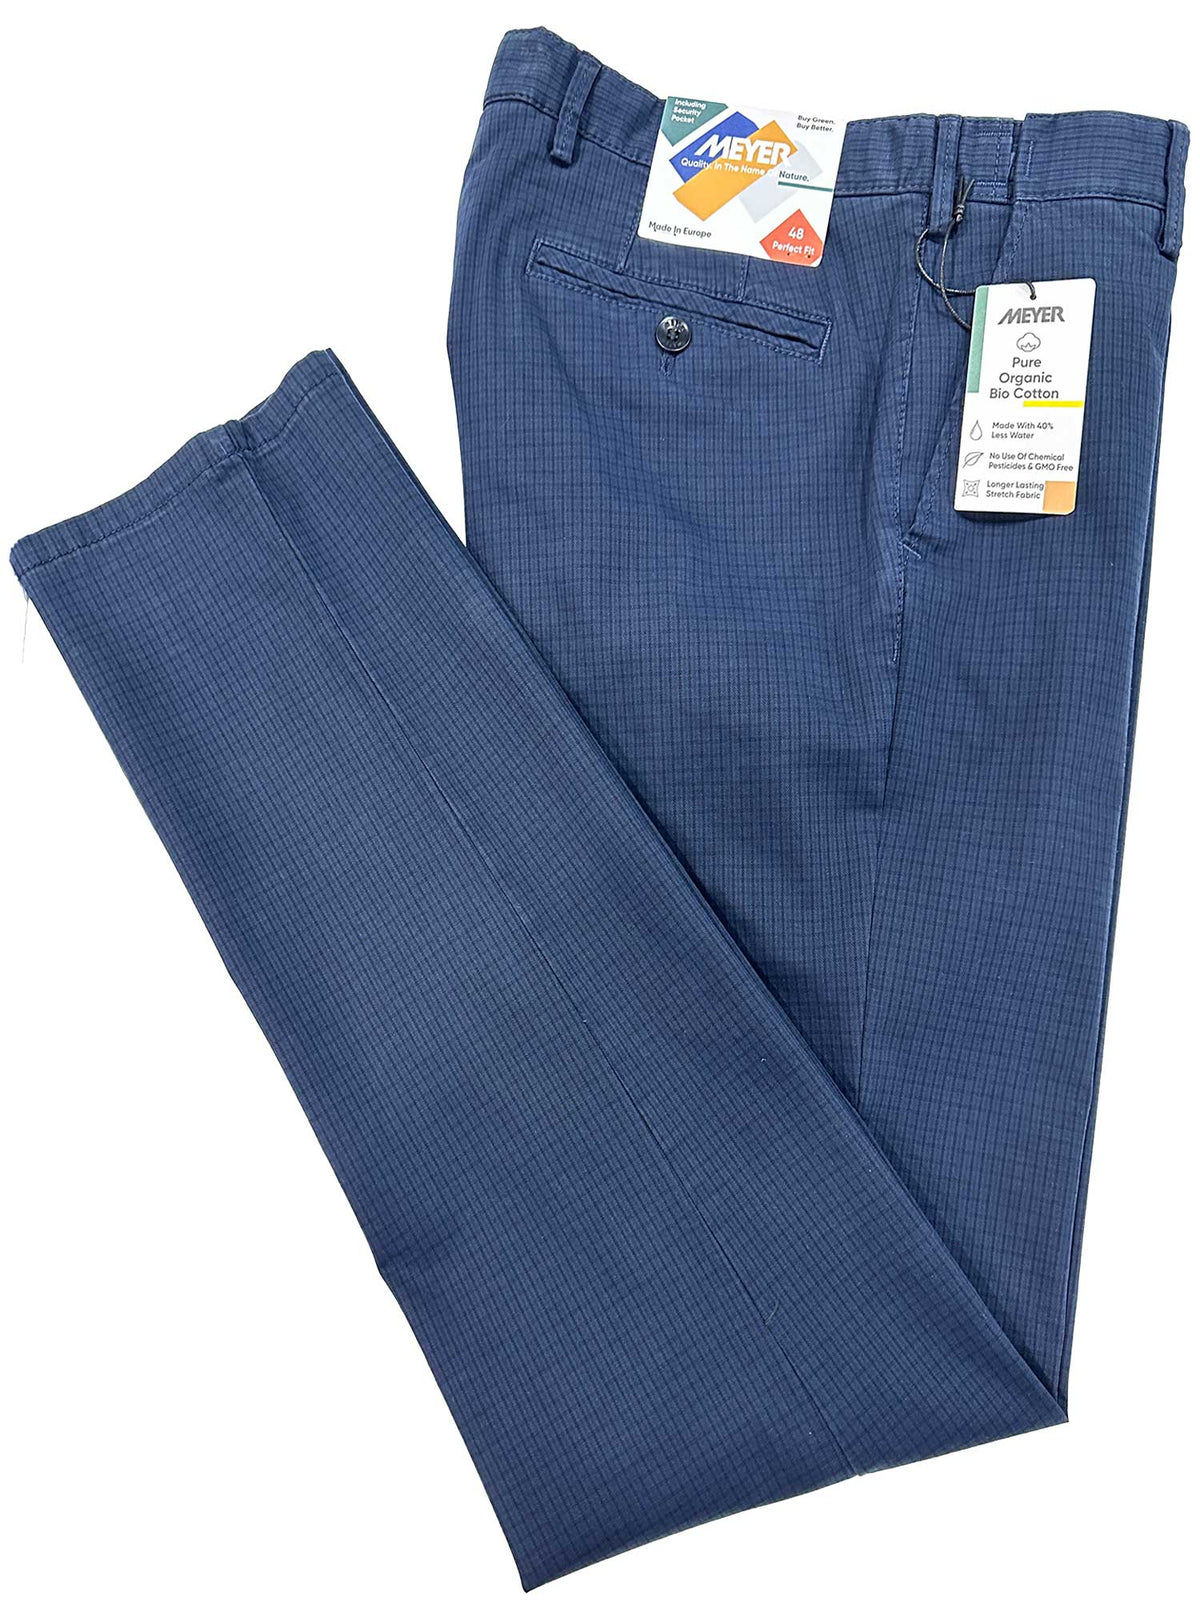 Meyer Bonn Casual Trousers are the perfect fit Invisible comfort created by high-performance super-stretch fabrics. 97% Cotton 3% Elastane Made in Romania Two side pockets with rear jetted pockets Fob pocket with contrast trim Internal security pocket with zip Full-extension band with metal Clip + 2 buttons for a firm secure fit with a YKK metal zipper. Pockets & seams are all tapped for extra strength & comfort Size is European regular fit- waist 48=34", 50=35" 52=36", 54=38", 56=40", 58=42"